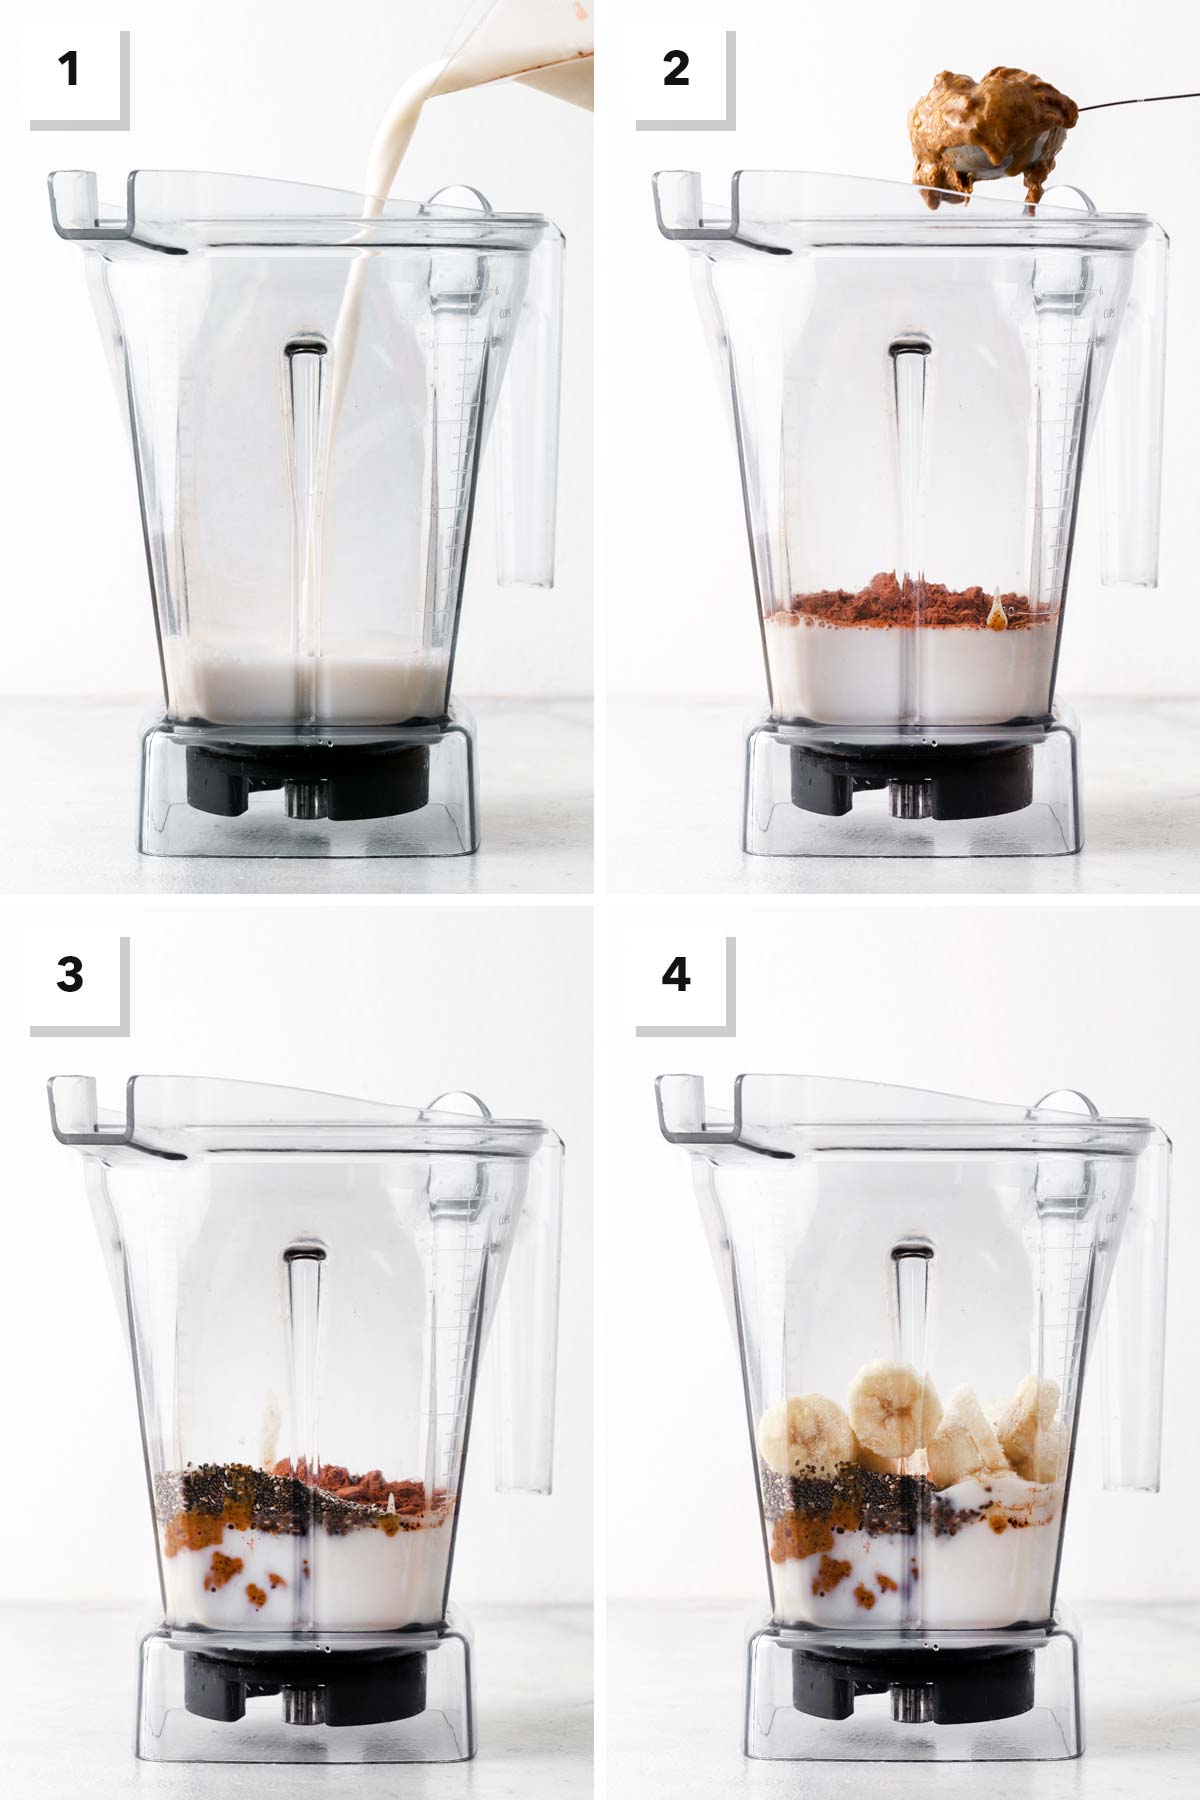 Steps for making a chocolate almond smoothie.